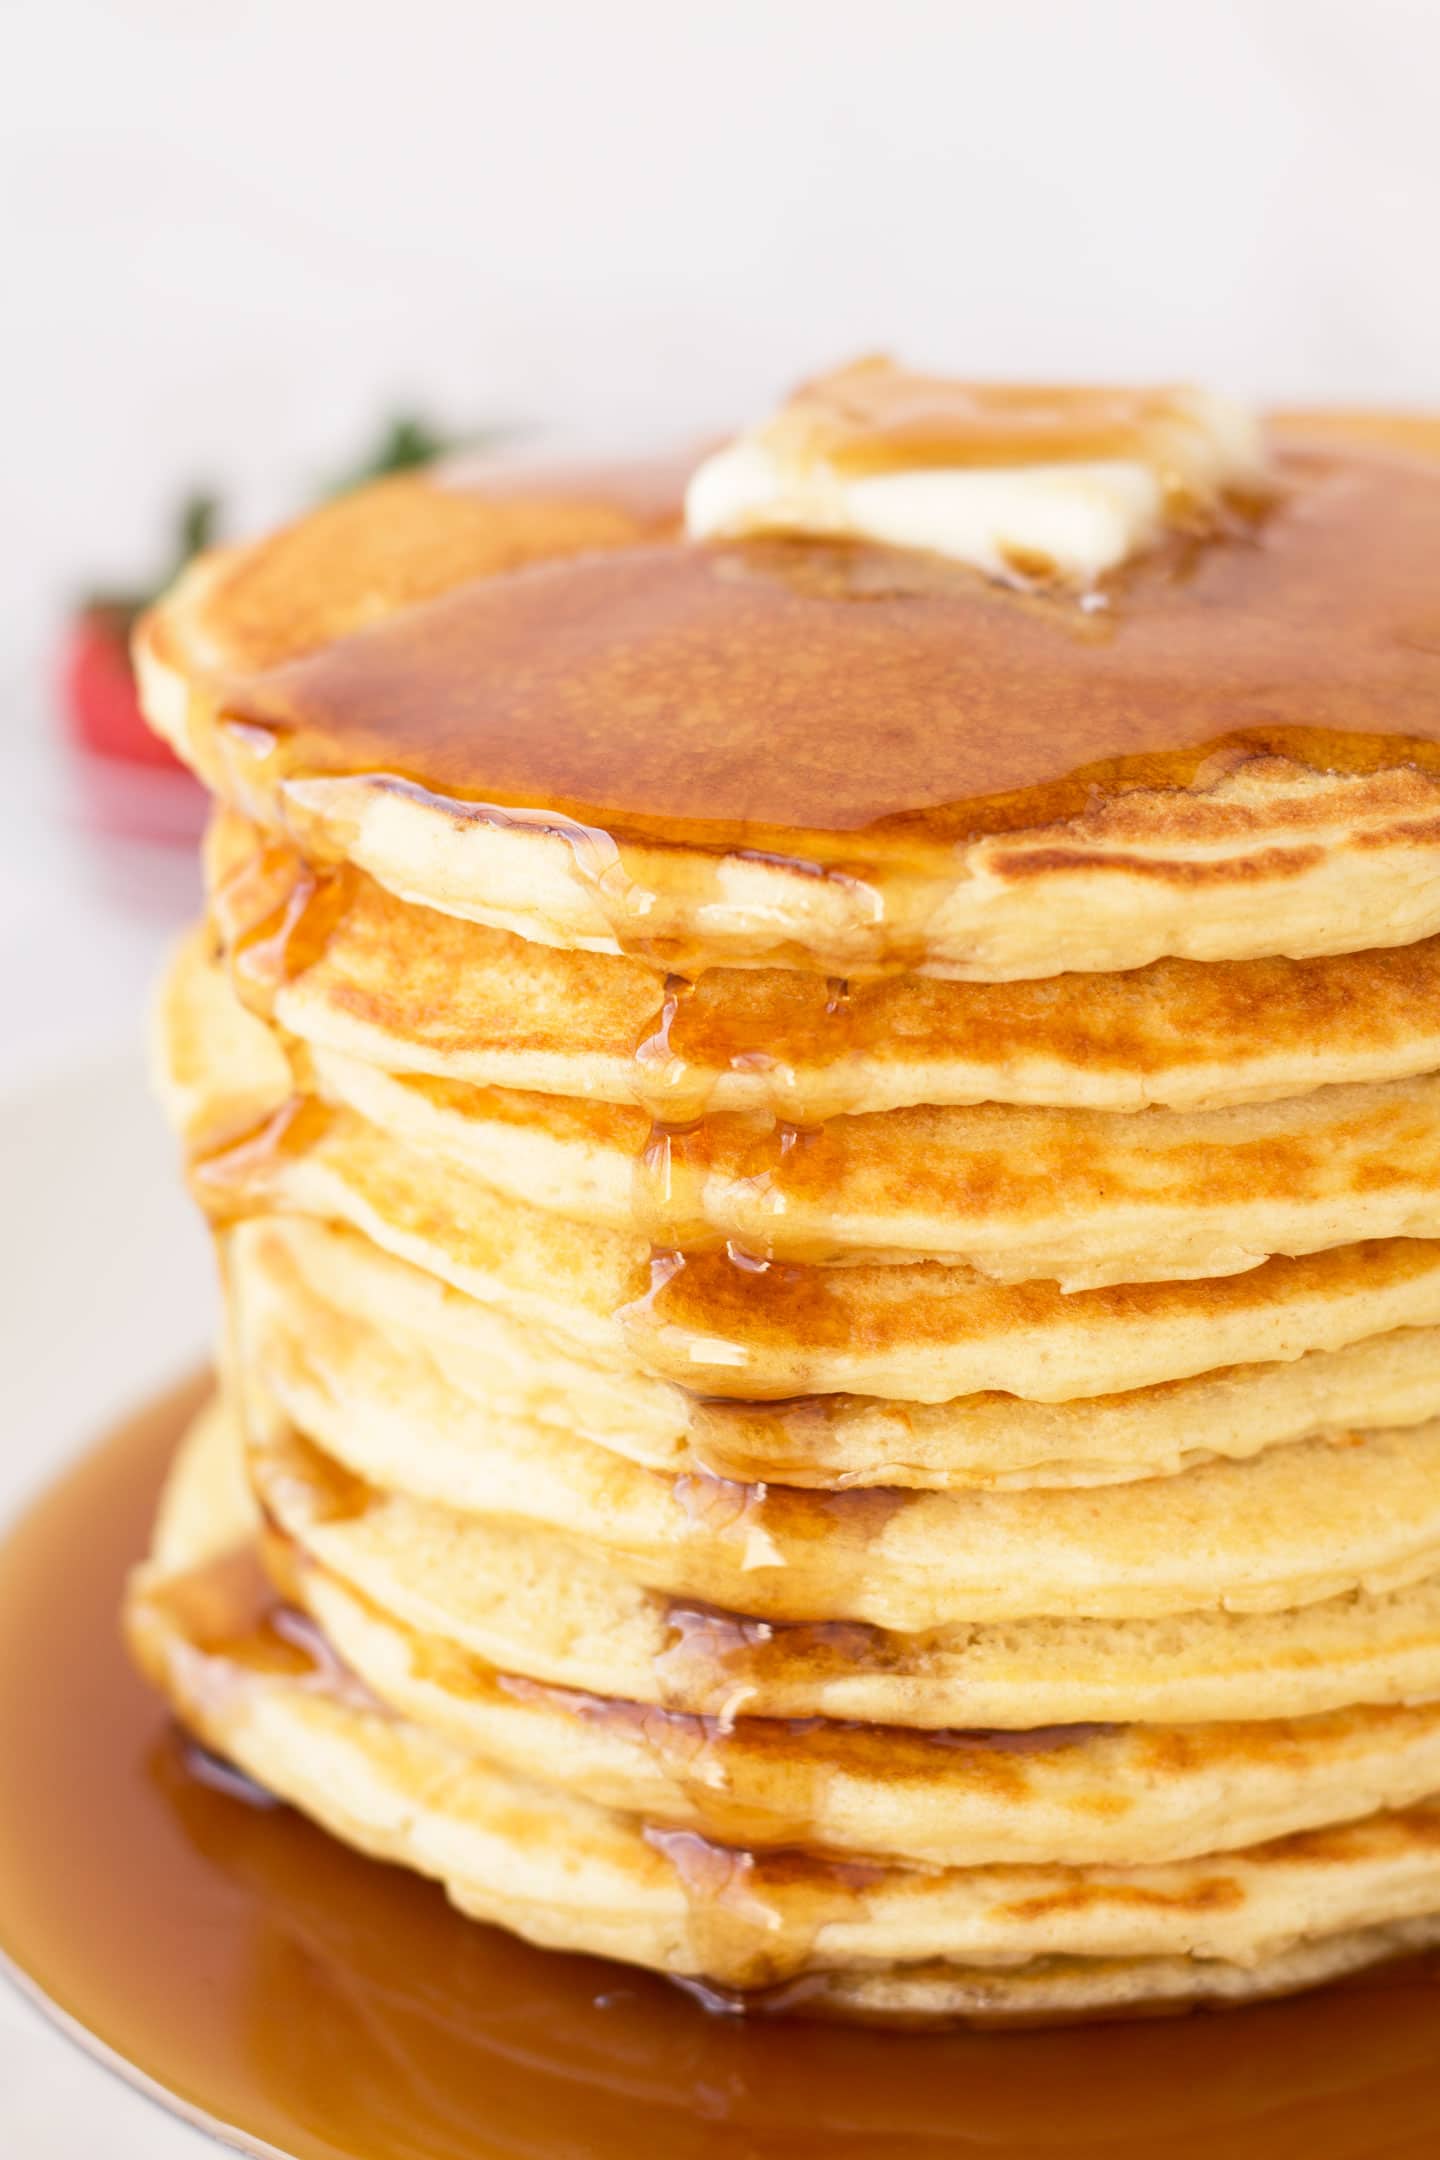 Tall stack of Famous Farm Pancakes (with buttermilk) with syrup